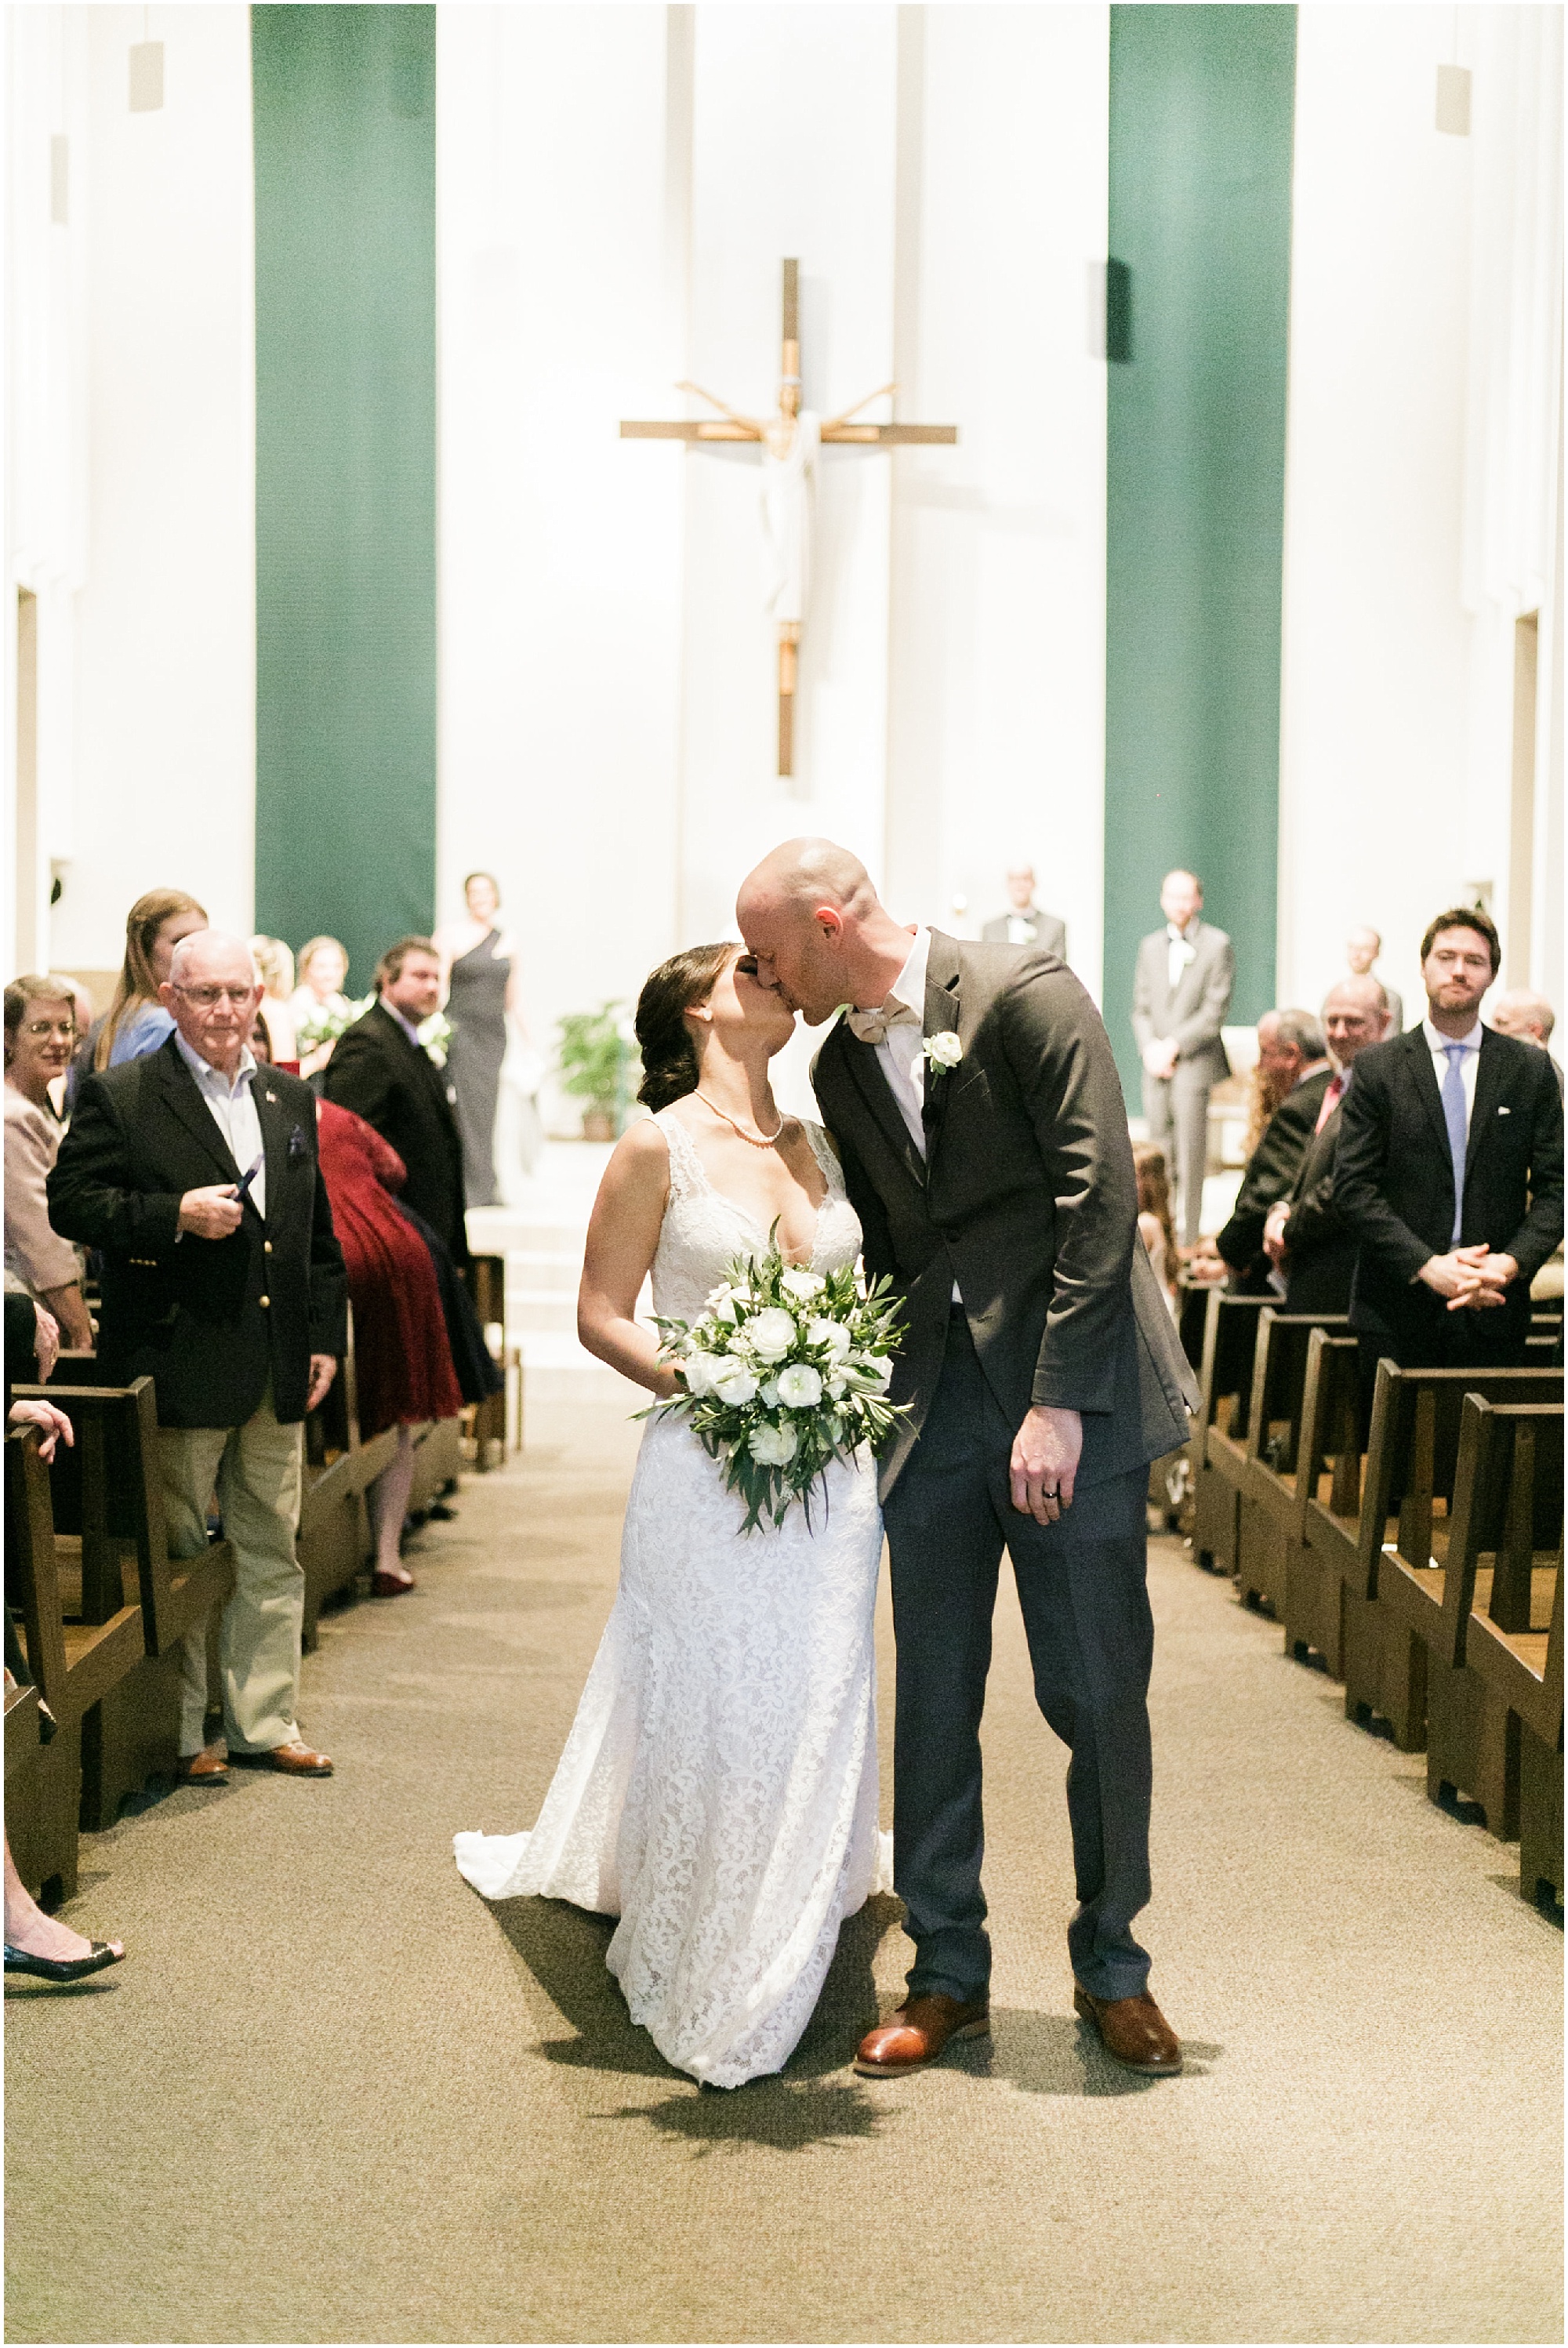 Newley wedded couple kisses at the end of the aisle after getting married.